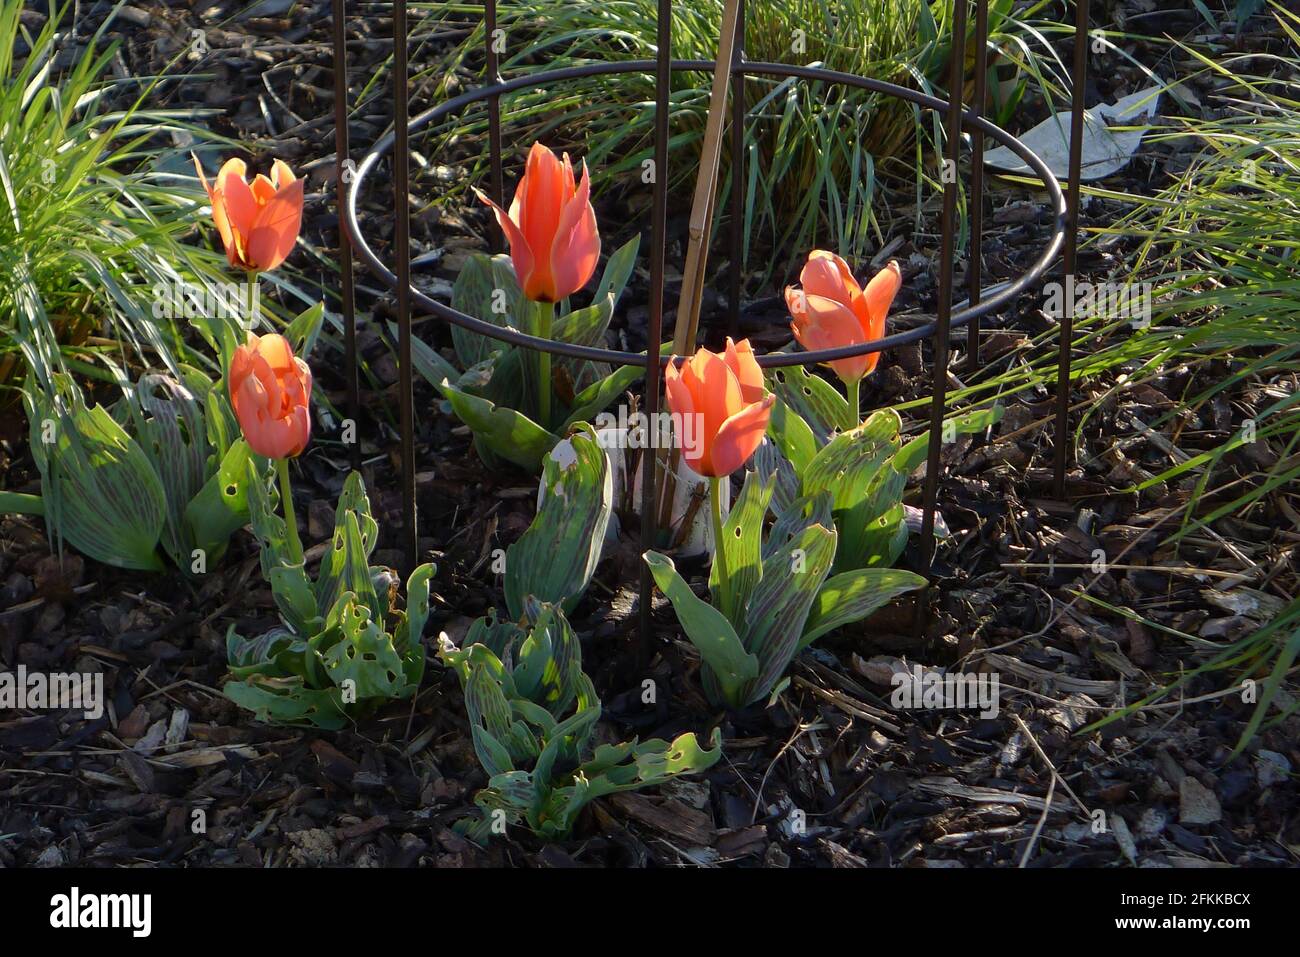 Orange-red Greigii tulips (tulipa) Calypso bloom in a garden in April. Its striped leaves are damaged  by slugs and snails Stock Photo